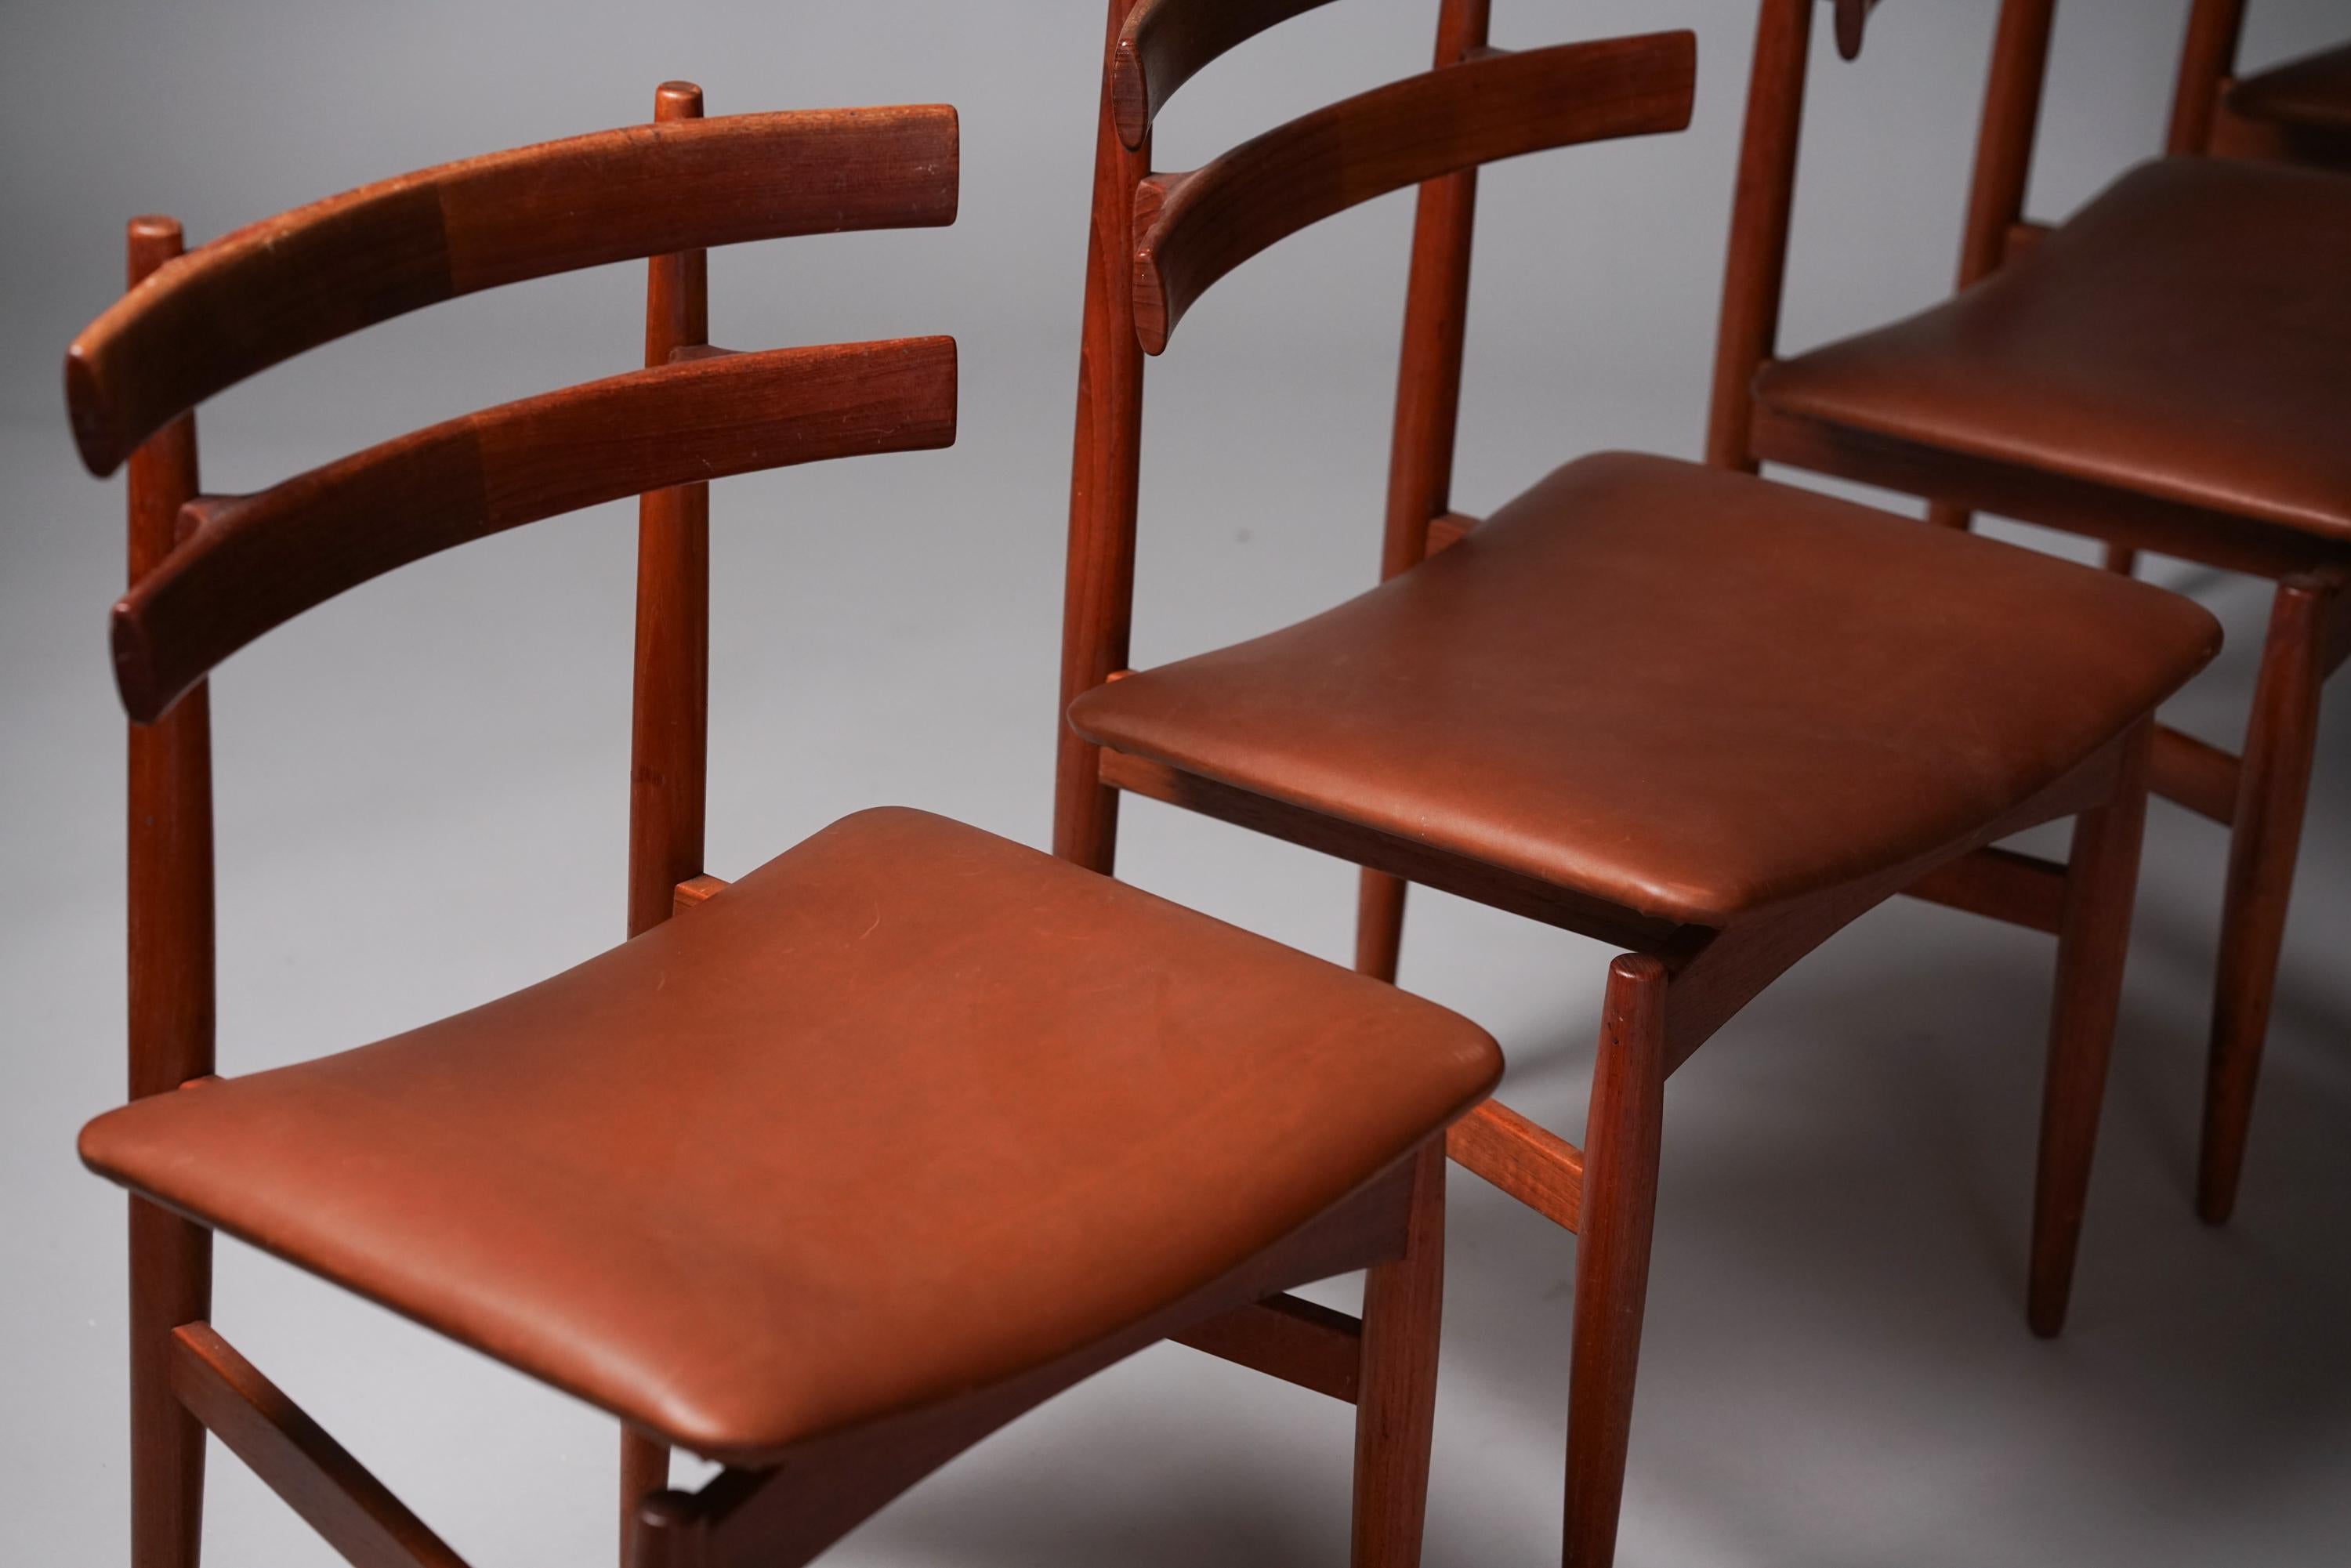 Set of Four Teak Chairs, Poul Hundevad, 1960s For Sale 1